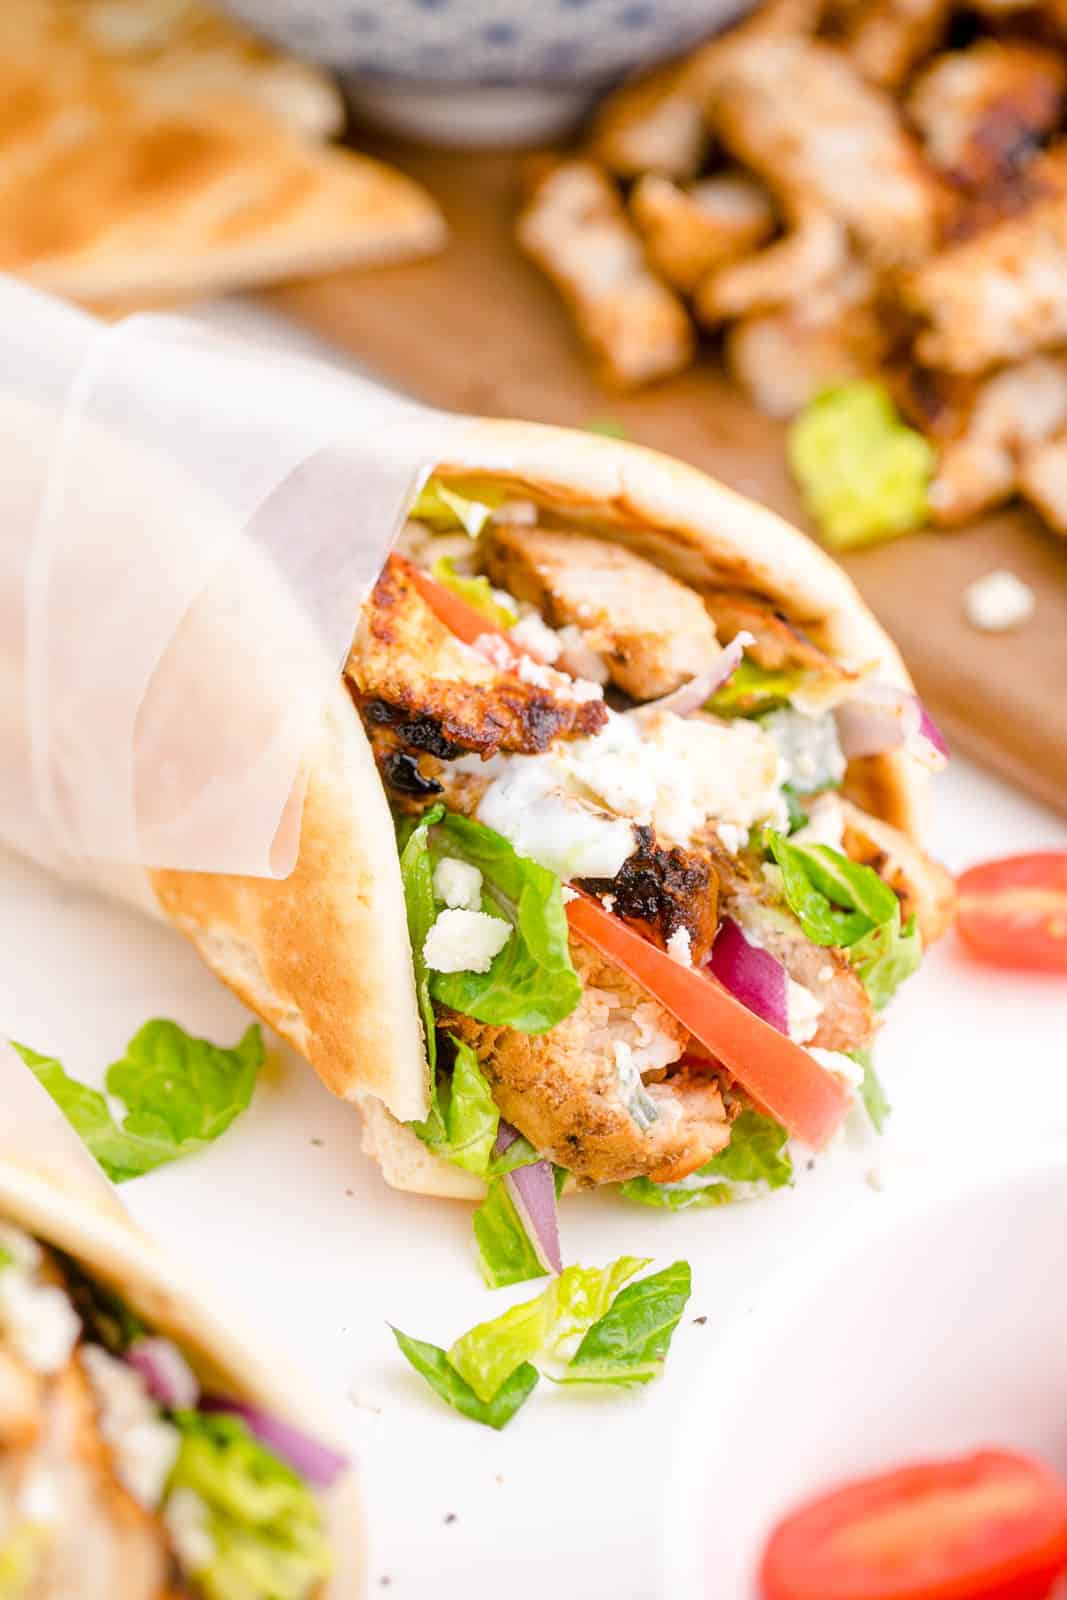 One Chicken Gyro wrapped in parchment paper showing all the filling ingredients.